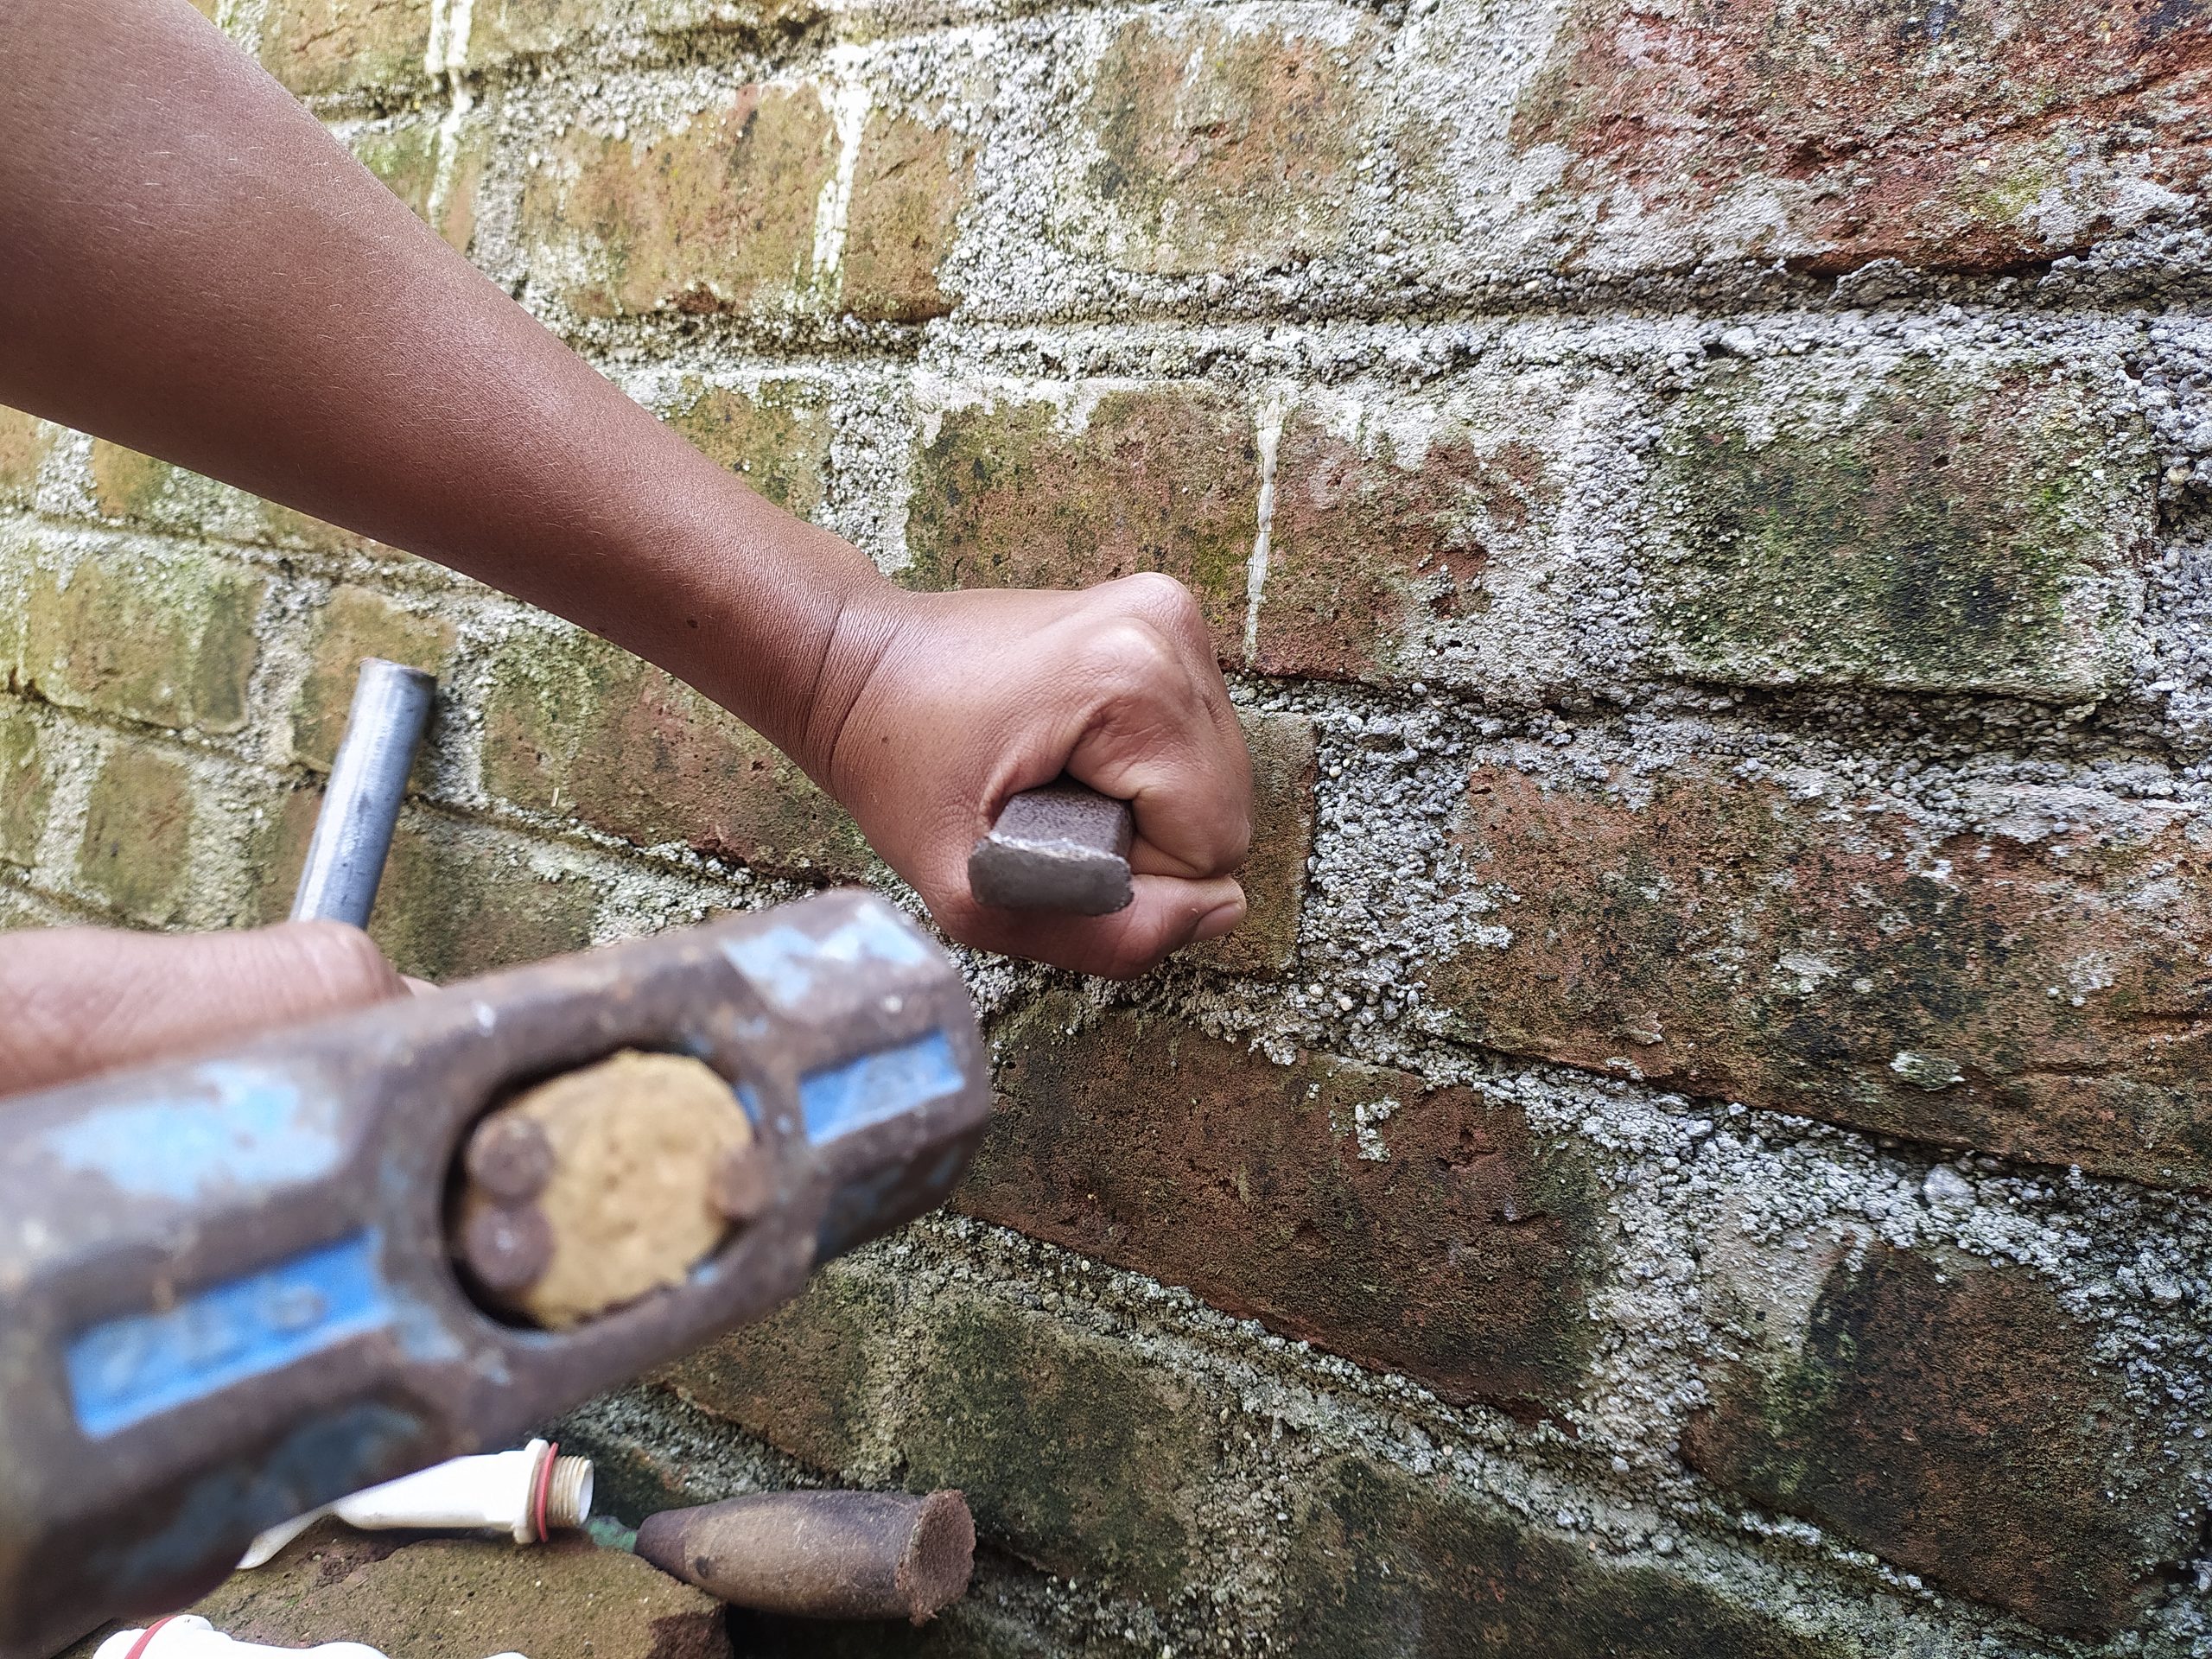 A plumber working on a wall